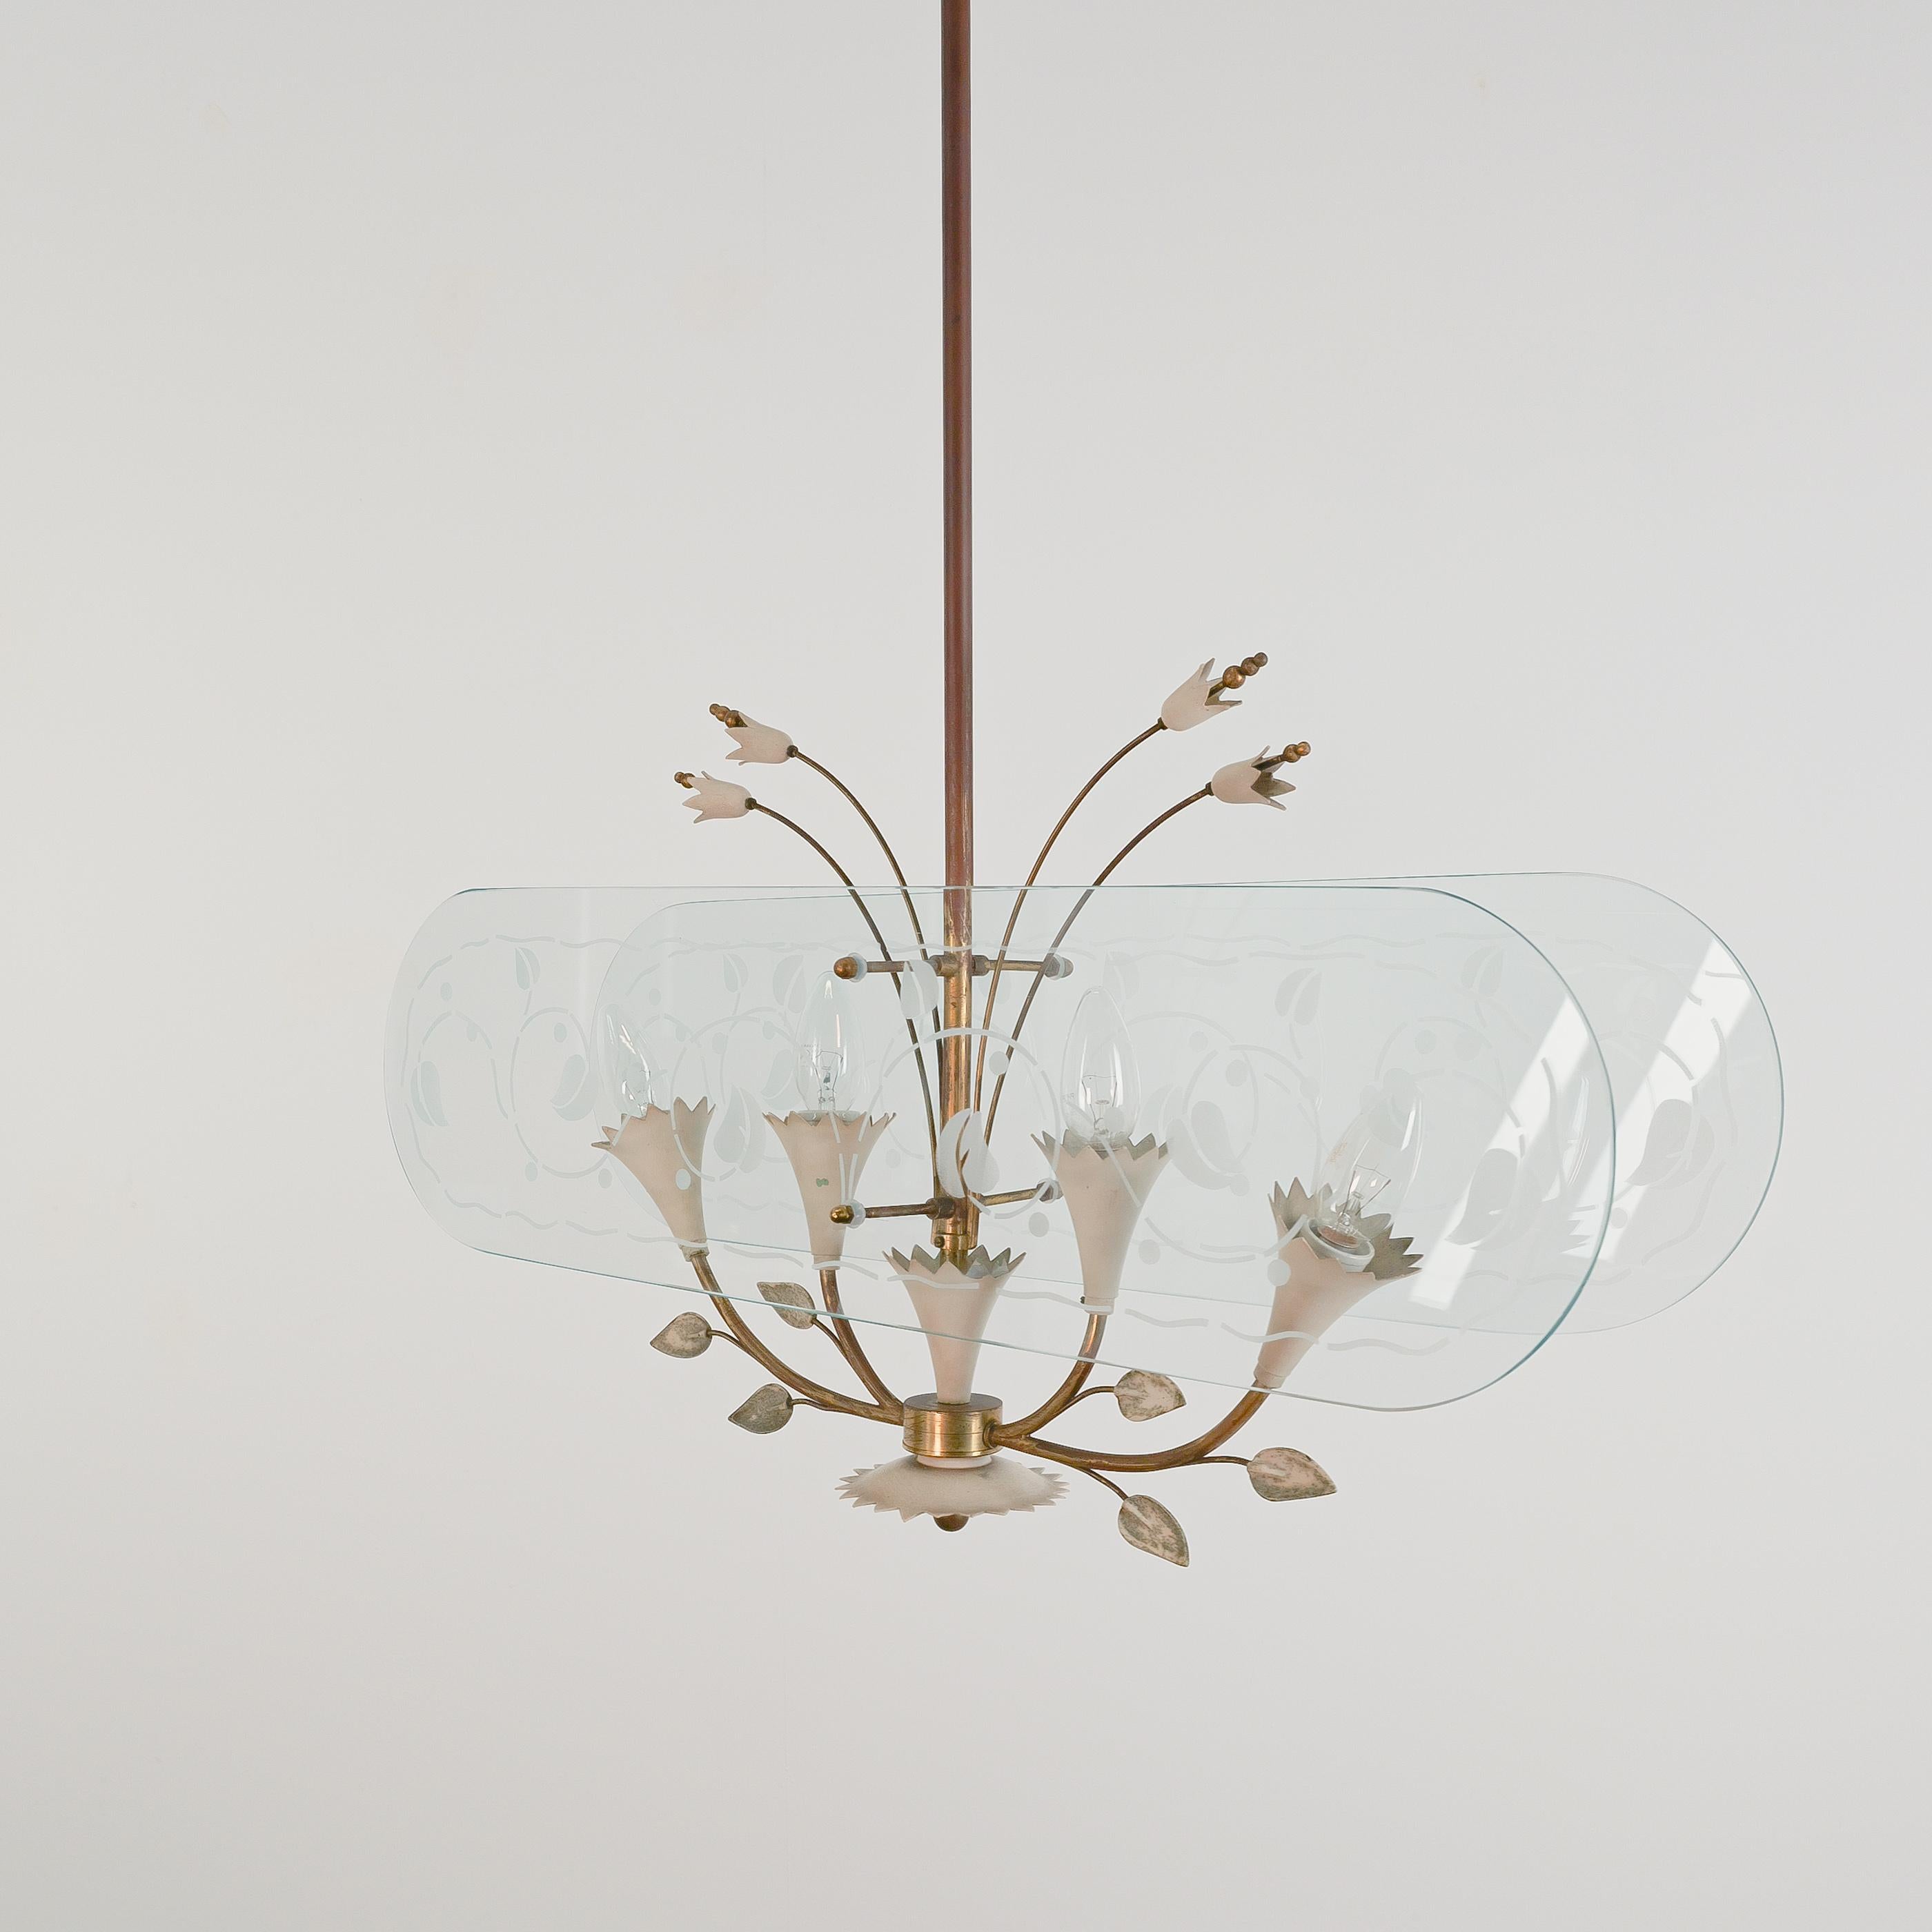 Mid-20th Century Pietro Chiesa Chandelier Floral Glass with Etched Details Italy, 1950 For Sale